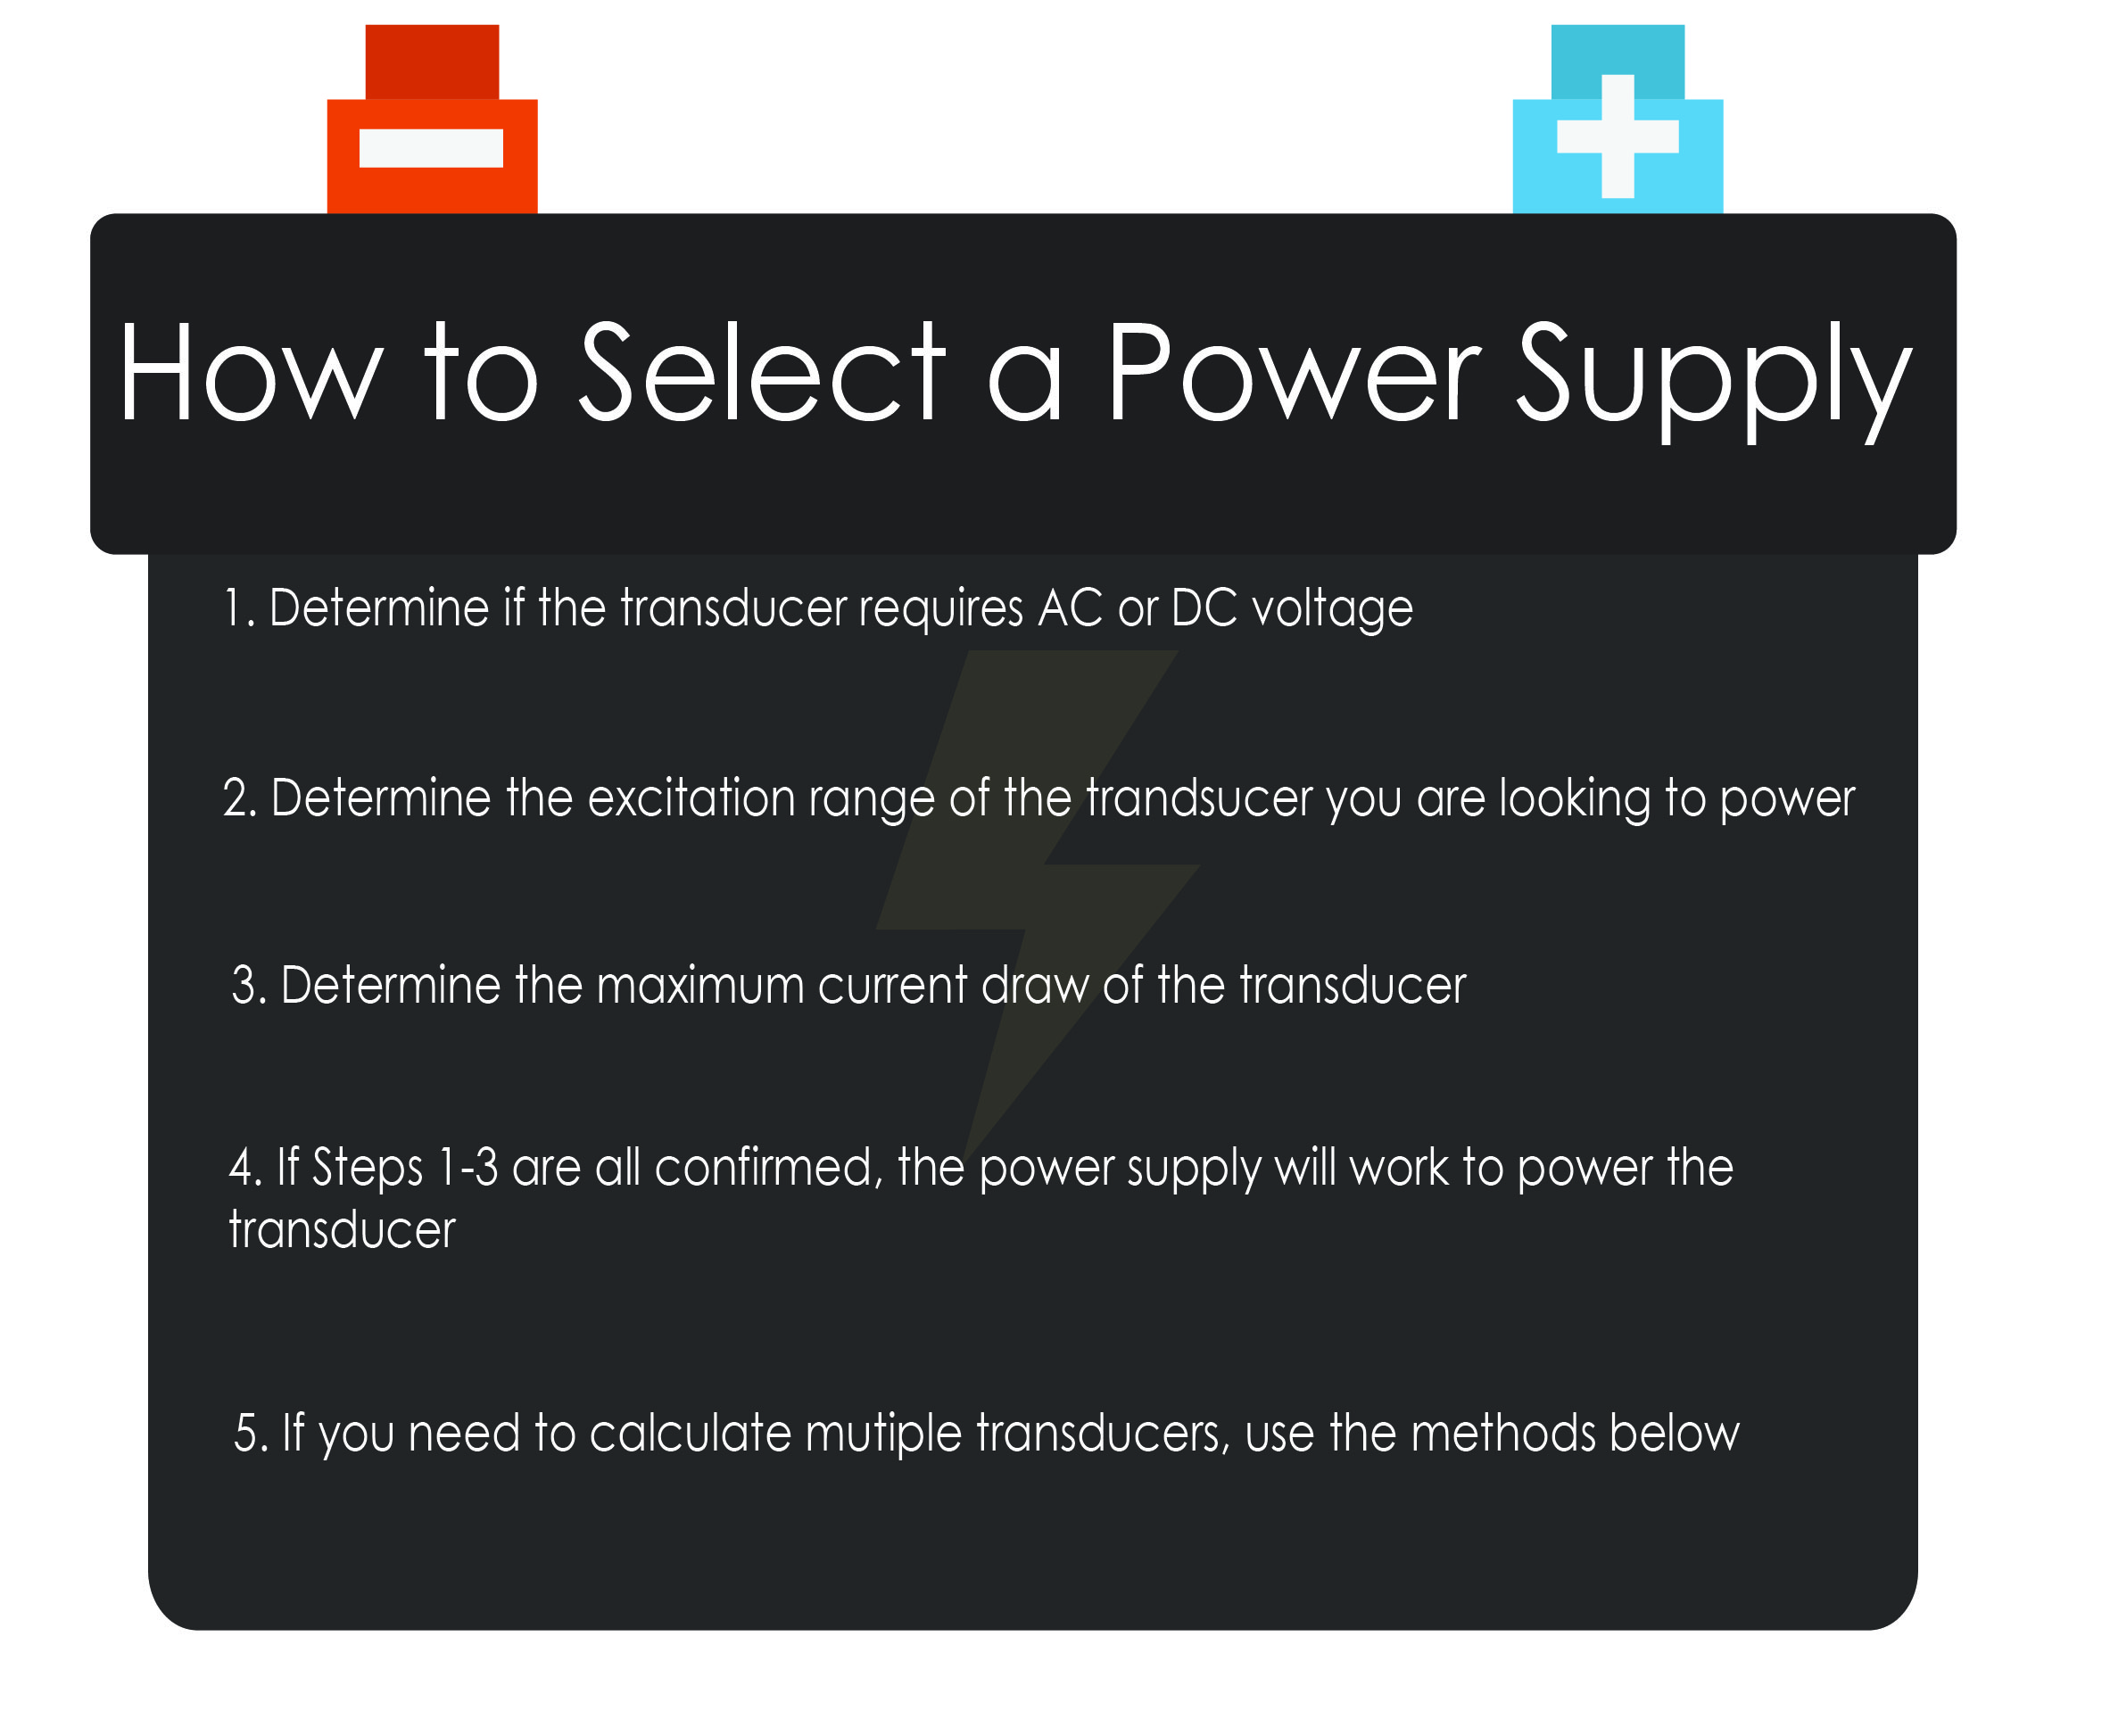 How to Select a Power Supply